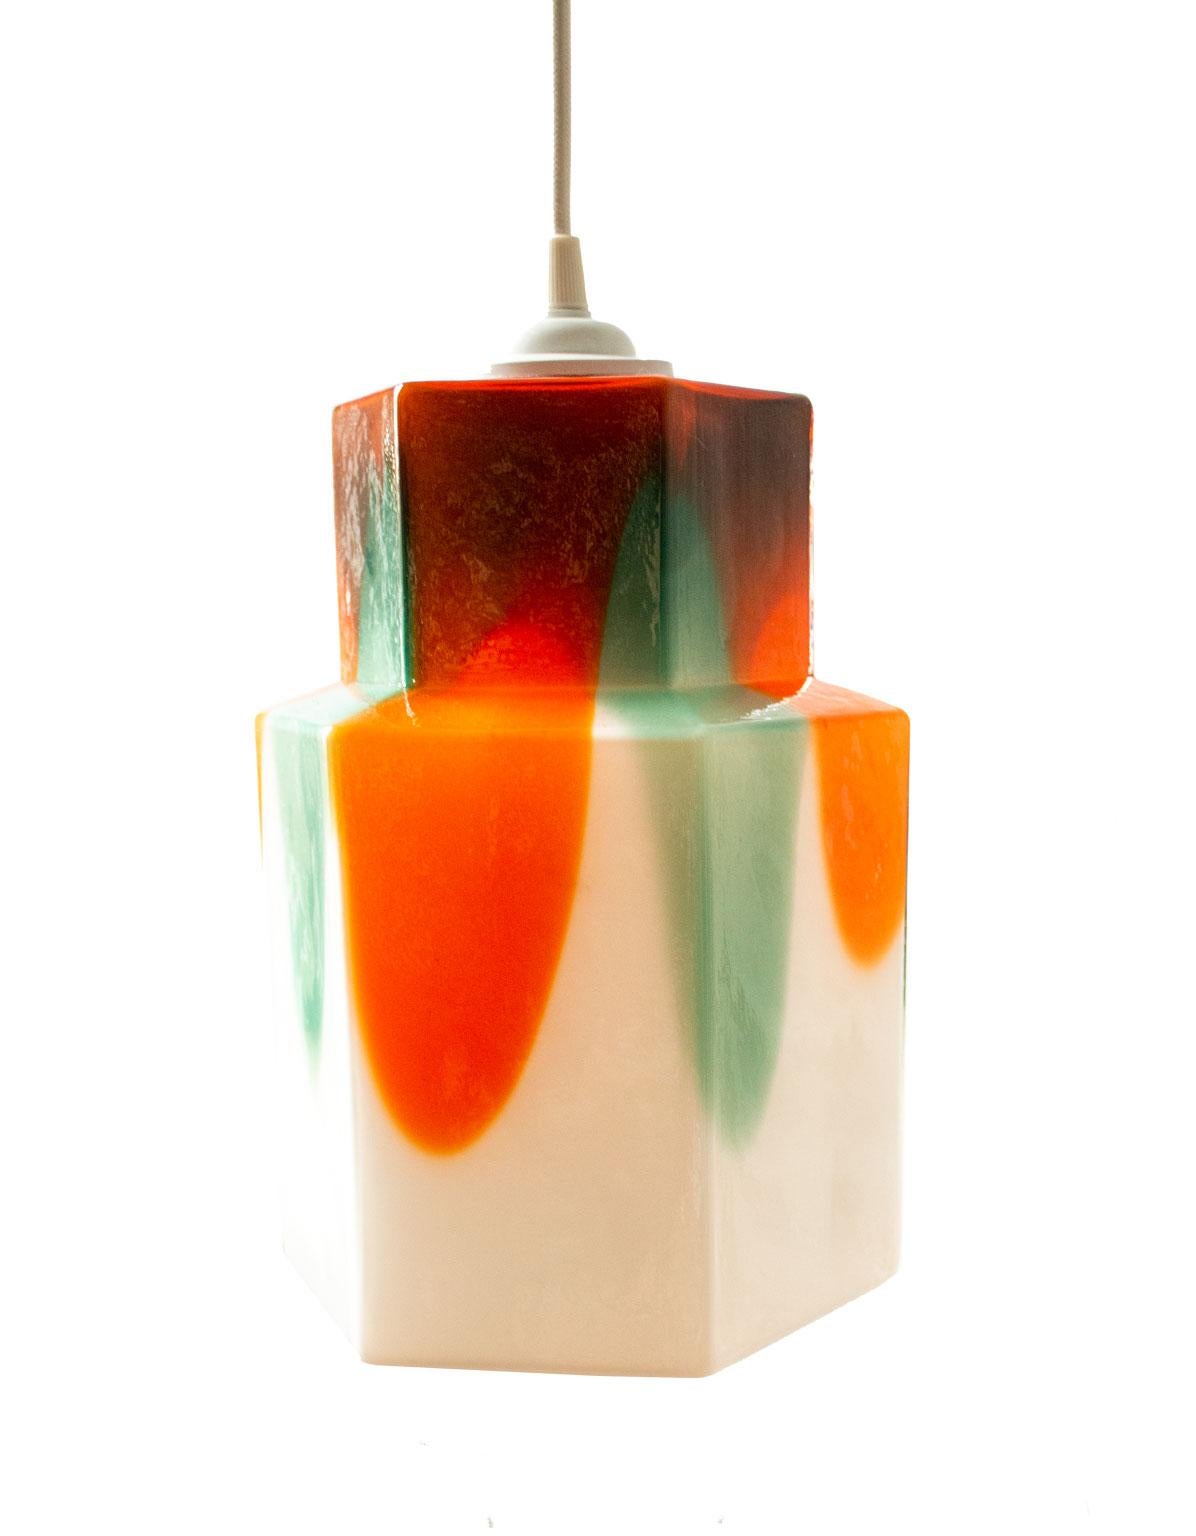 Scandinavian modern glass pendant by Helena Tynell, 1960s. A hexagonal glass pendant designed by Helena Tynell for Flygsfors, Sweden, 1960s. A large tiered body of white handblown glass with painterly streaks of red, orange and turquoise emphasizing